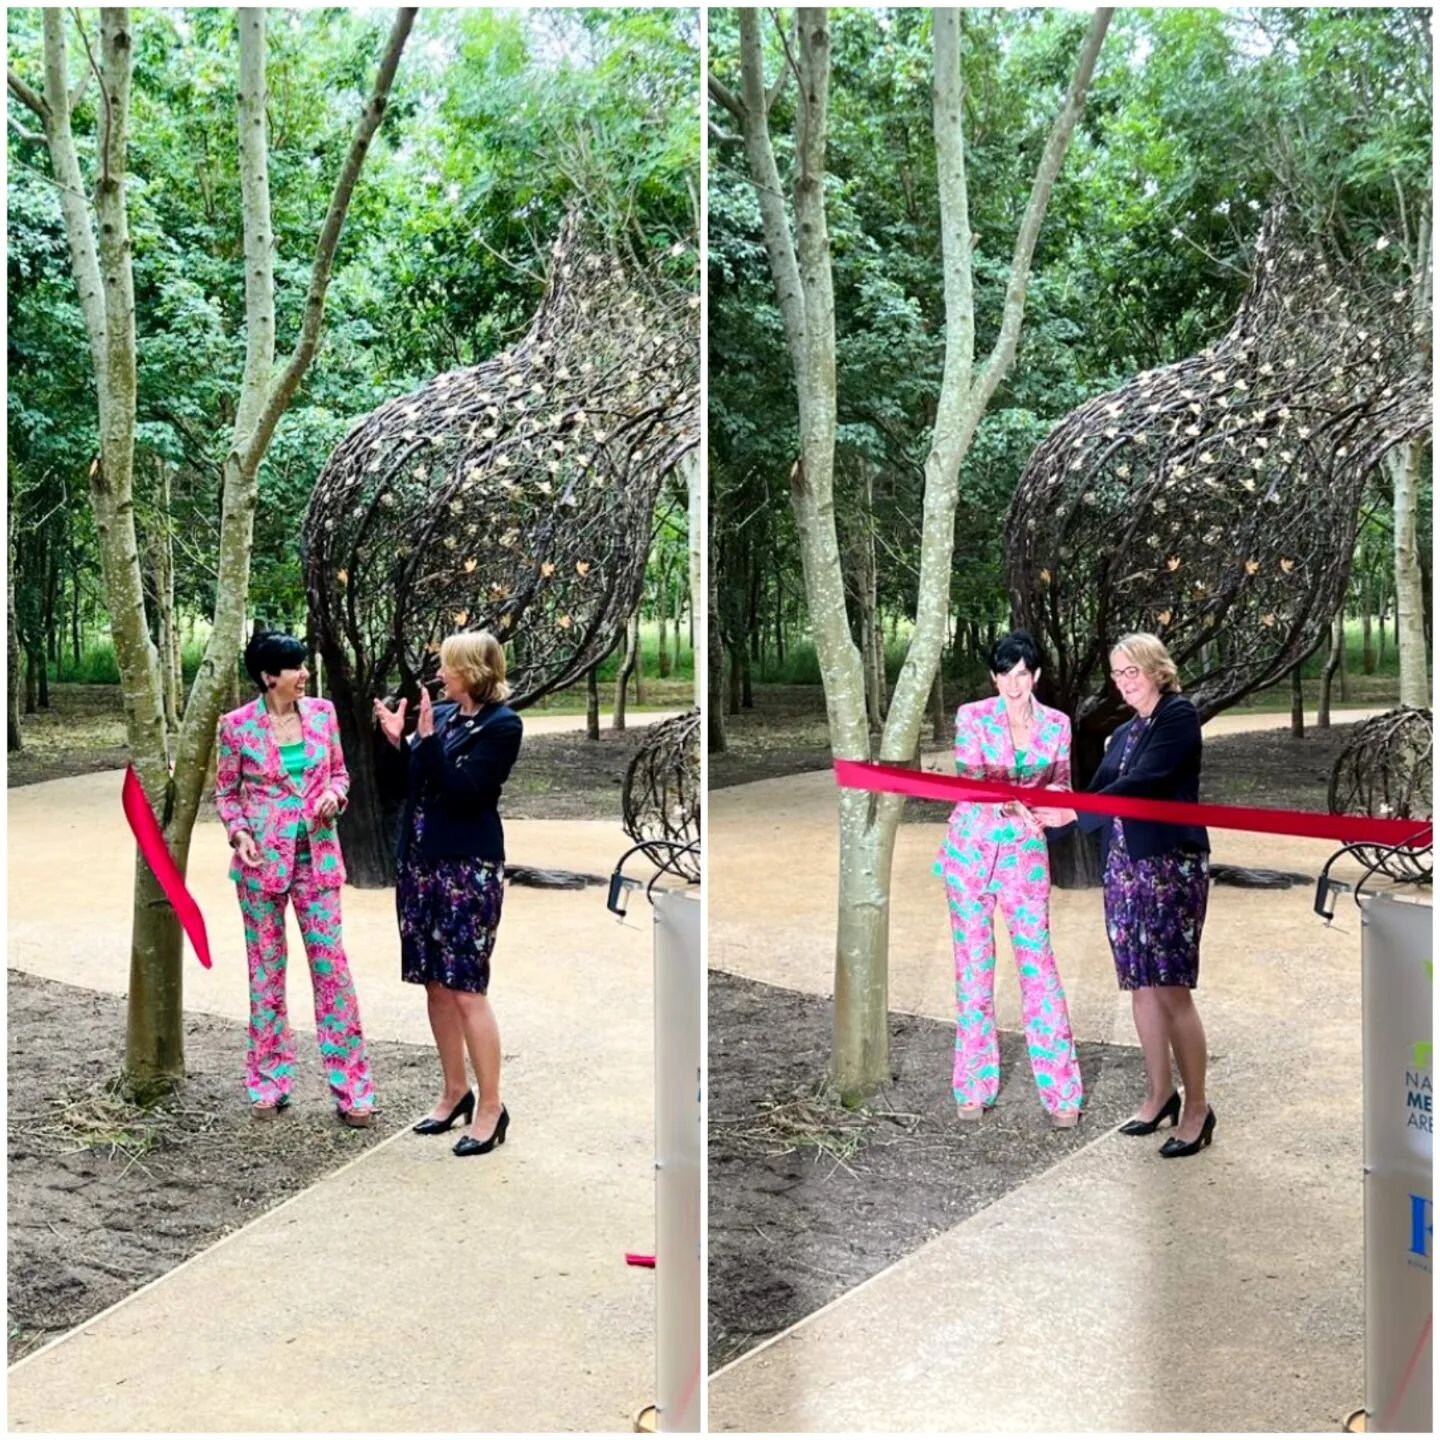 Delighted to&nbsp;unveil my latest sculpture 'Tree of Cherished Memories'&nbsp;today @nat_mem_arb&nbsp;featuring the first of the bronze-sculpted leaves and figures dedicated to your loved ones. 🍃🍂

Inspired by a Hawthorn tree from the Arboretum, t